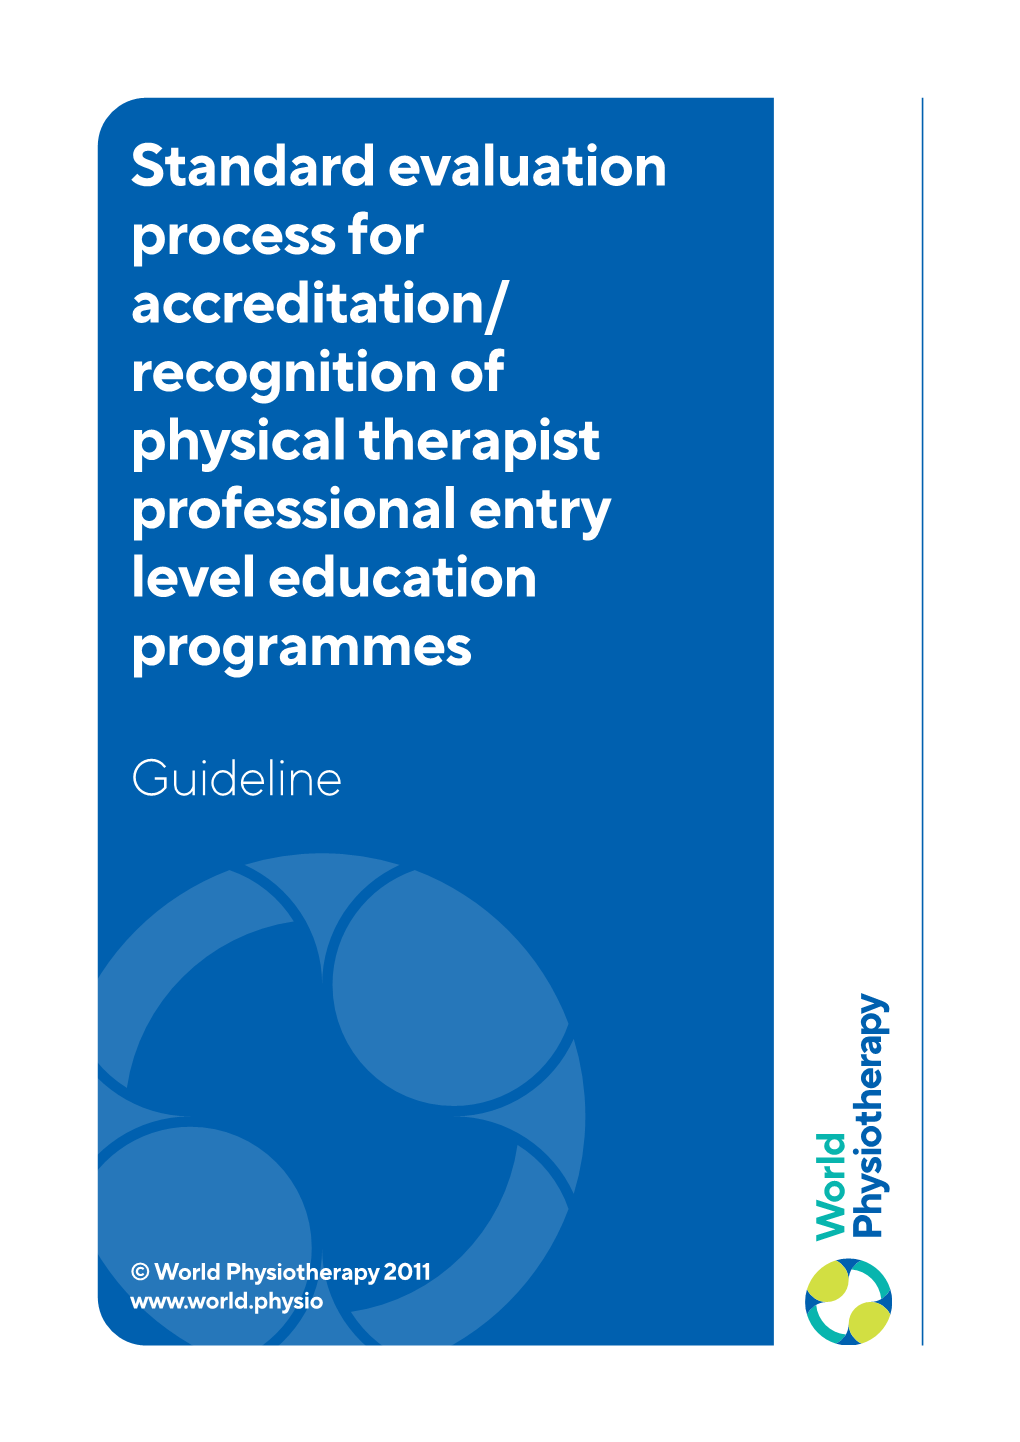 Recognition of Physical Therapist Professional Entry Level Education Programmes